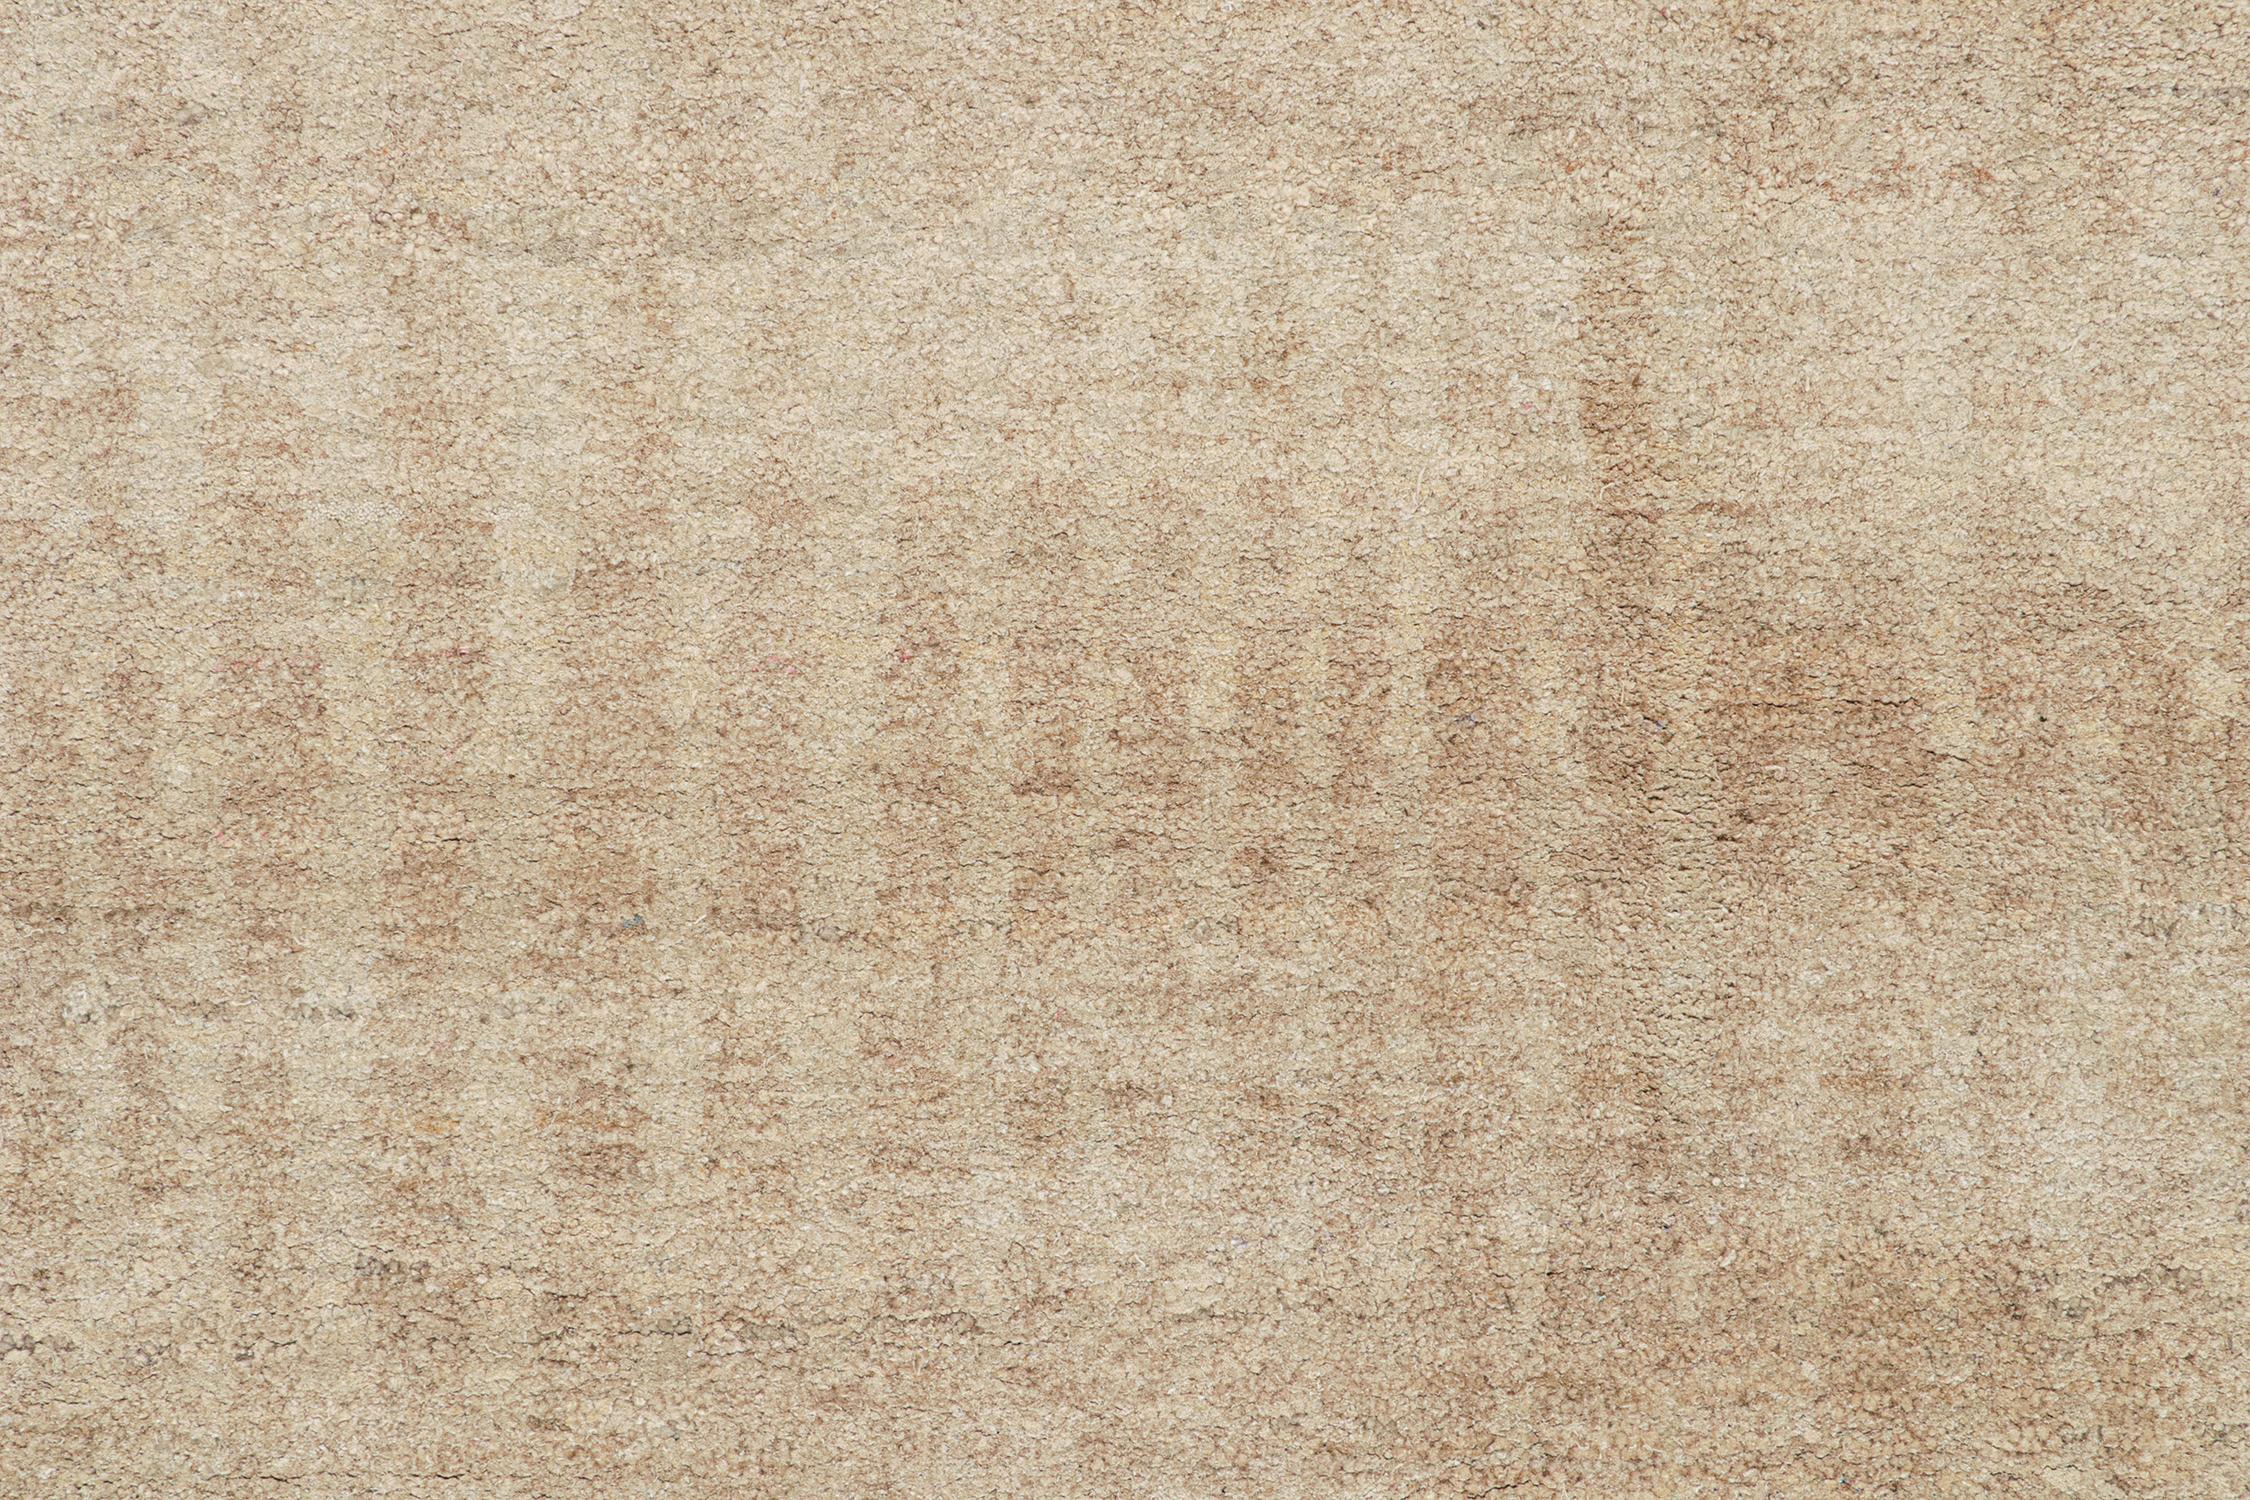 Rug & Kilim’s Contemporary Rug in Beige-Brown Tone-on-tone Striae In New Condition For Sale In Long Island City, NY